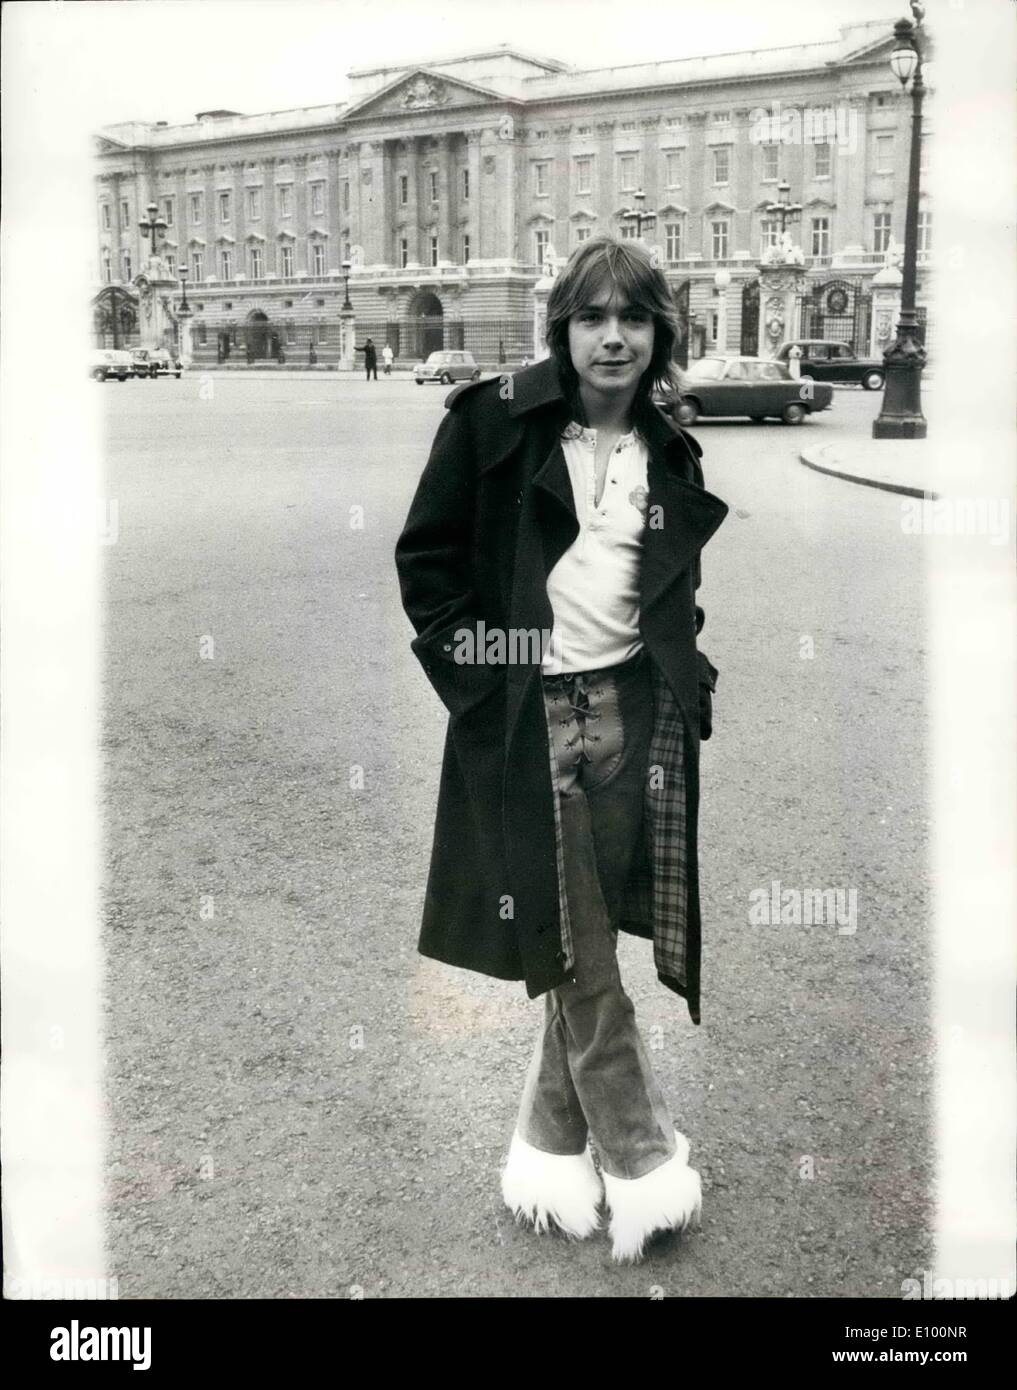 Feb. 02, 1972 - America's Newest Superstar - David Cassidy, In London: Currently making his first visit to Great Britain is American's newest Superstar - 21-year-old singer-actor David Cassidy. Star of ''The Partridge Family'' television series, now in its second year in America, David today went on a sightseeing tour of London. Photo shows David Cassidy pictured outside Buckingham Palace today. Stock Photo